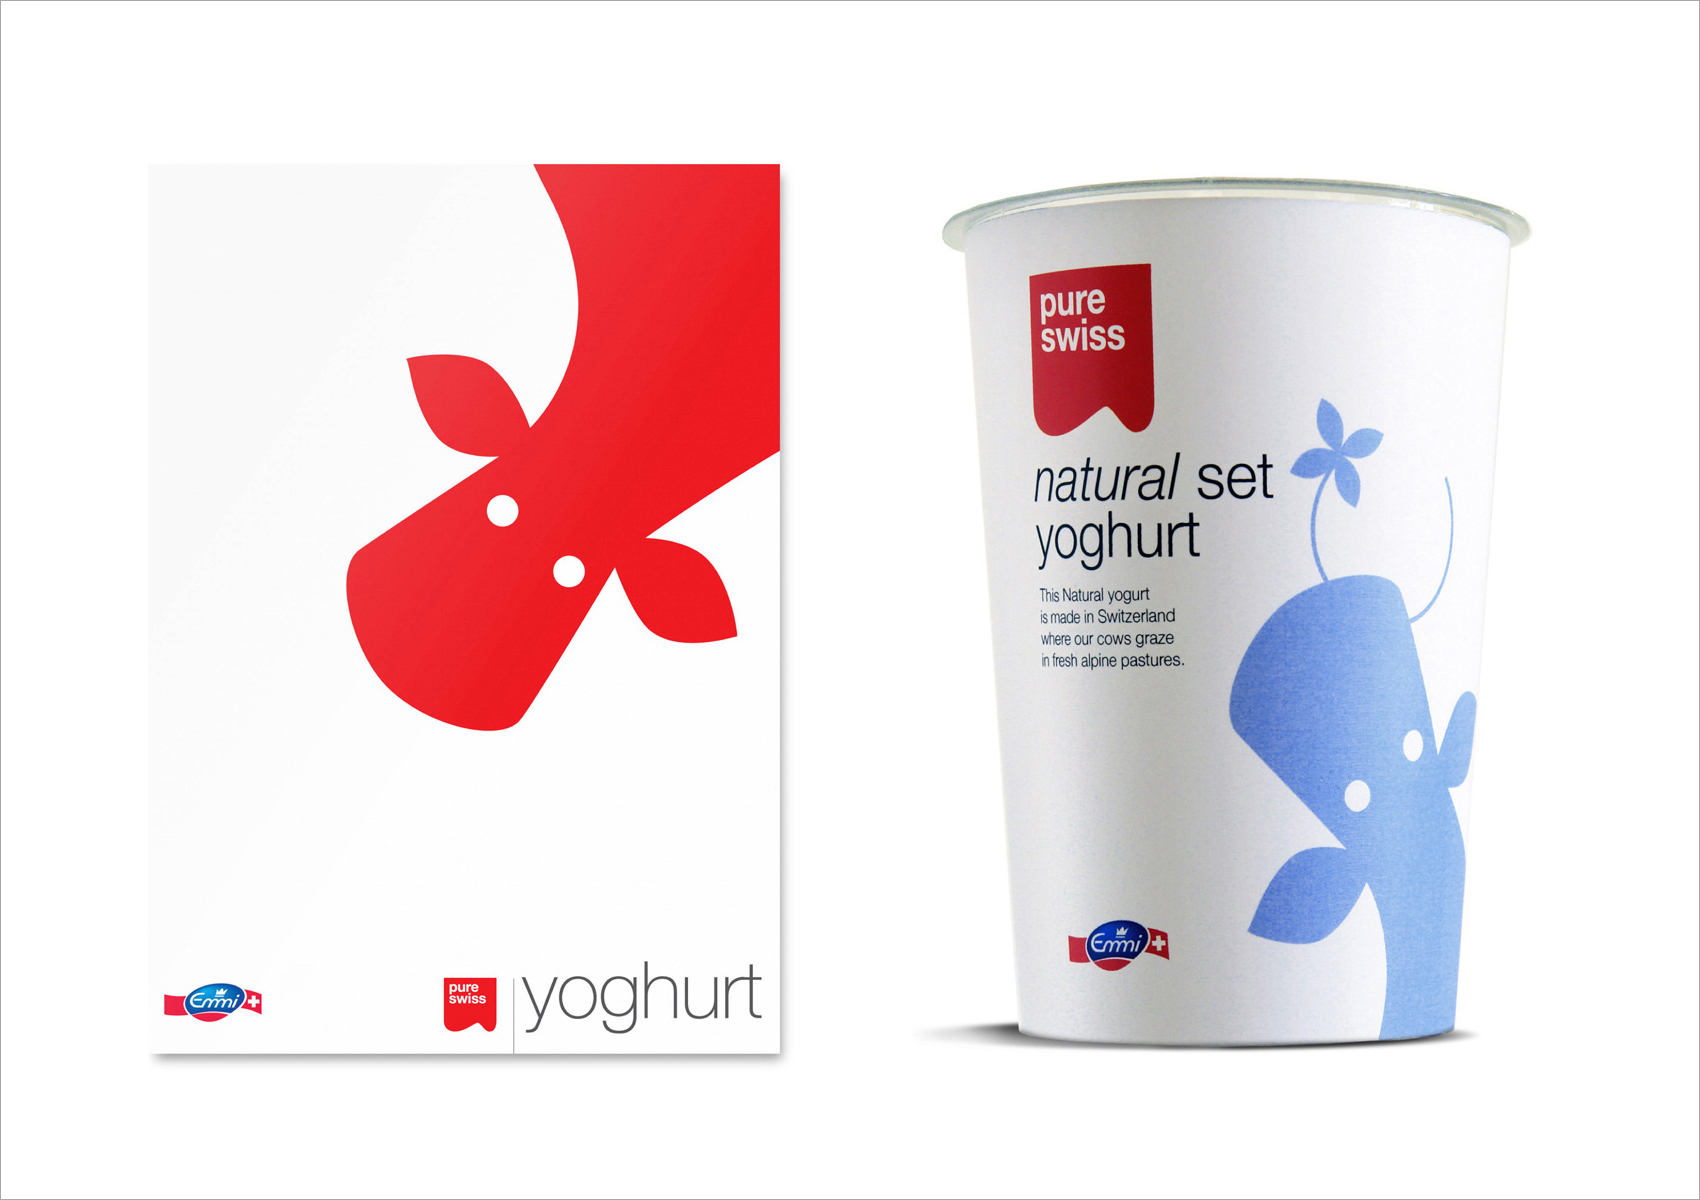 Packaging designed by Studio h for yoghurt range Pure Swiss from Emmi